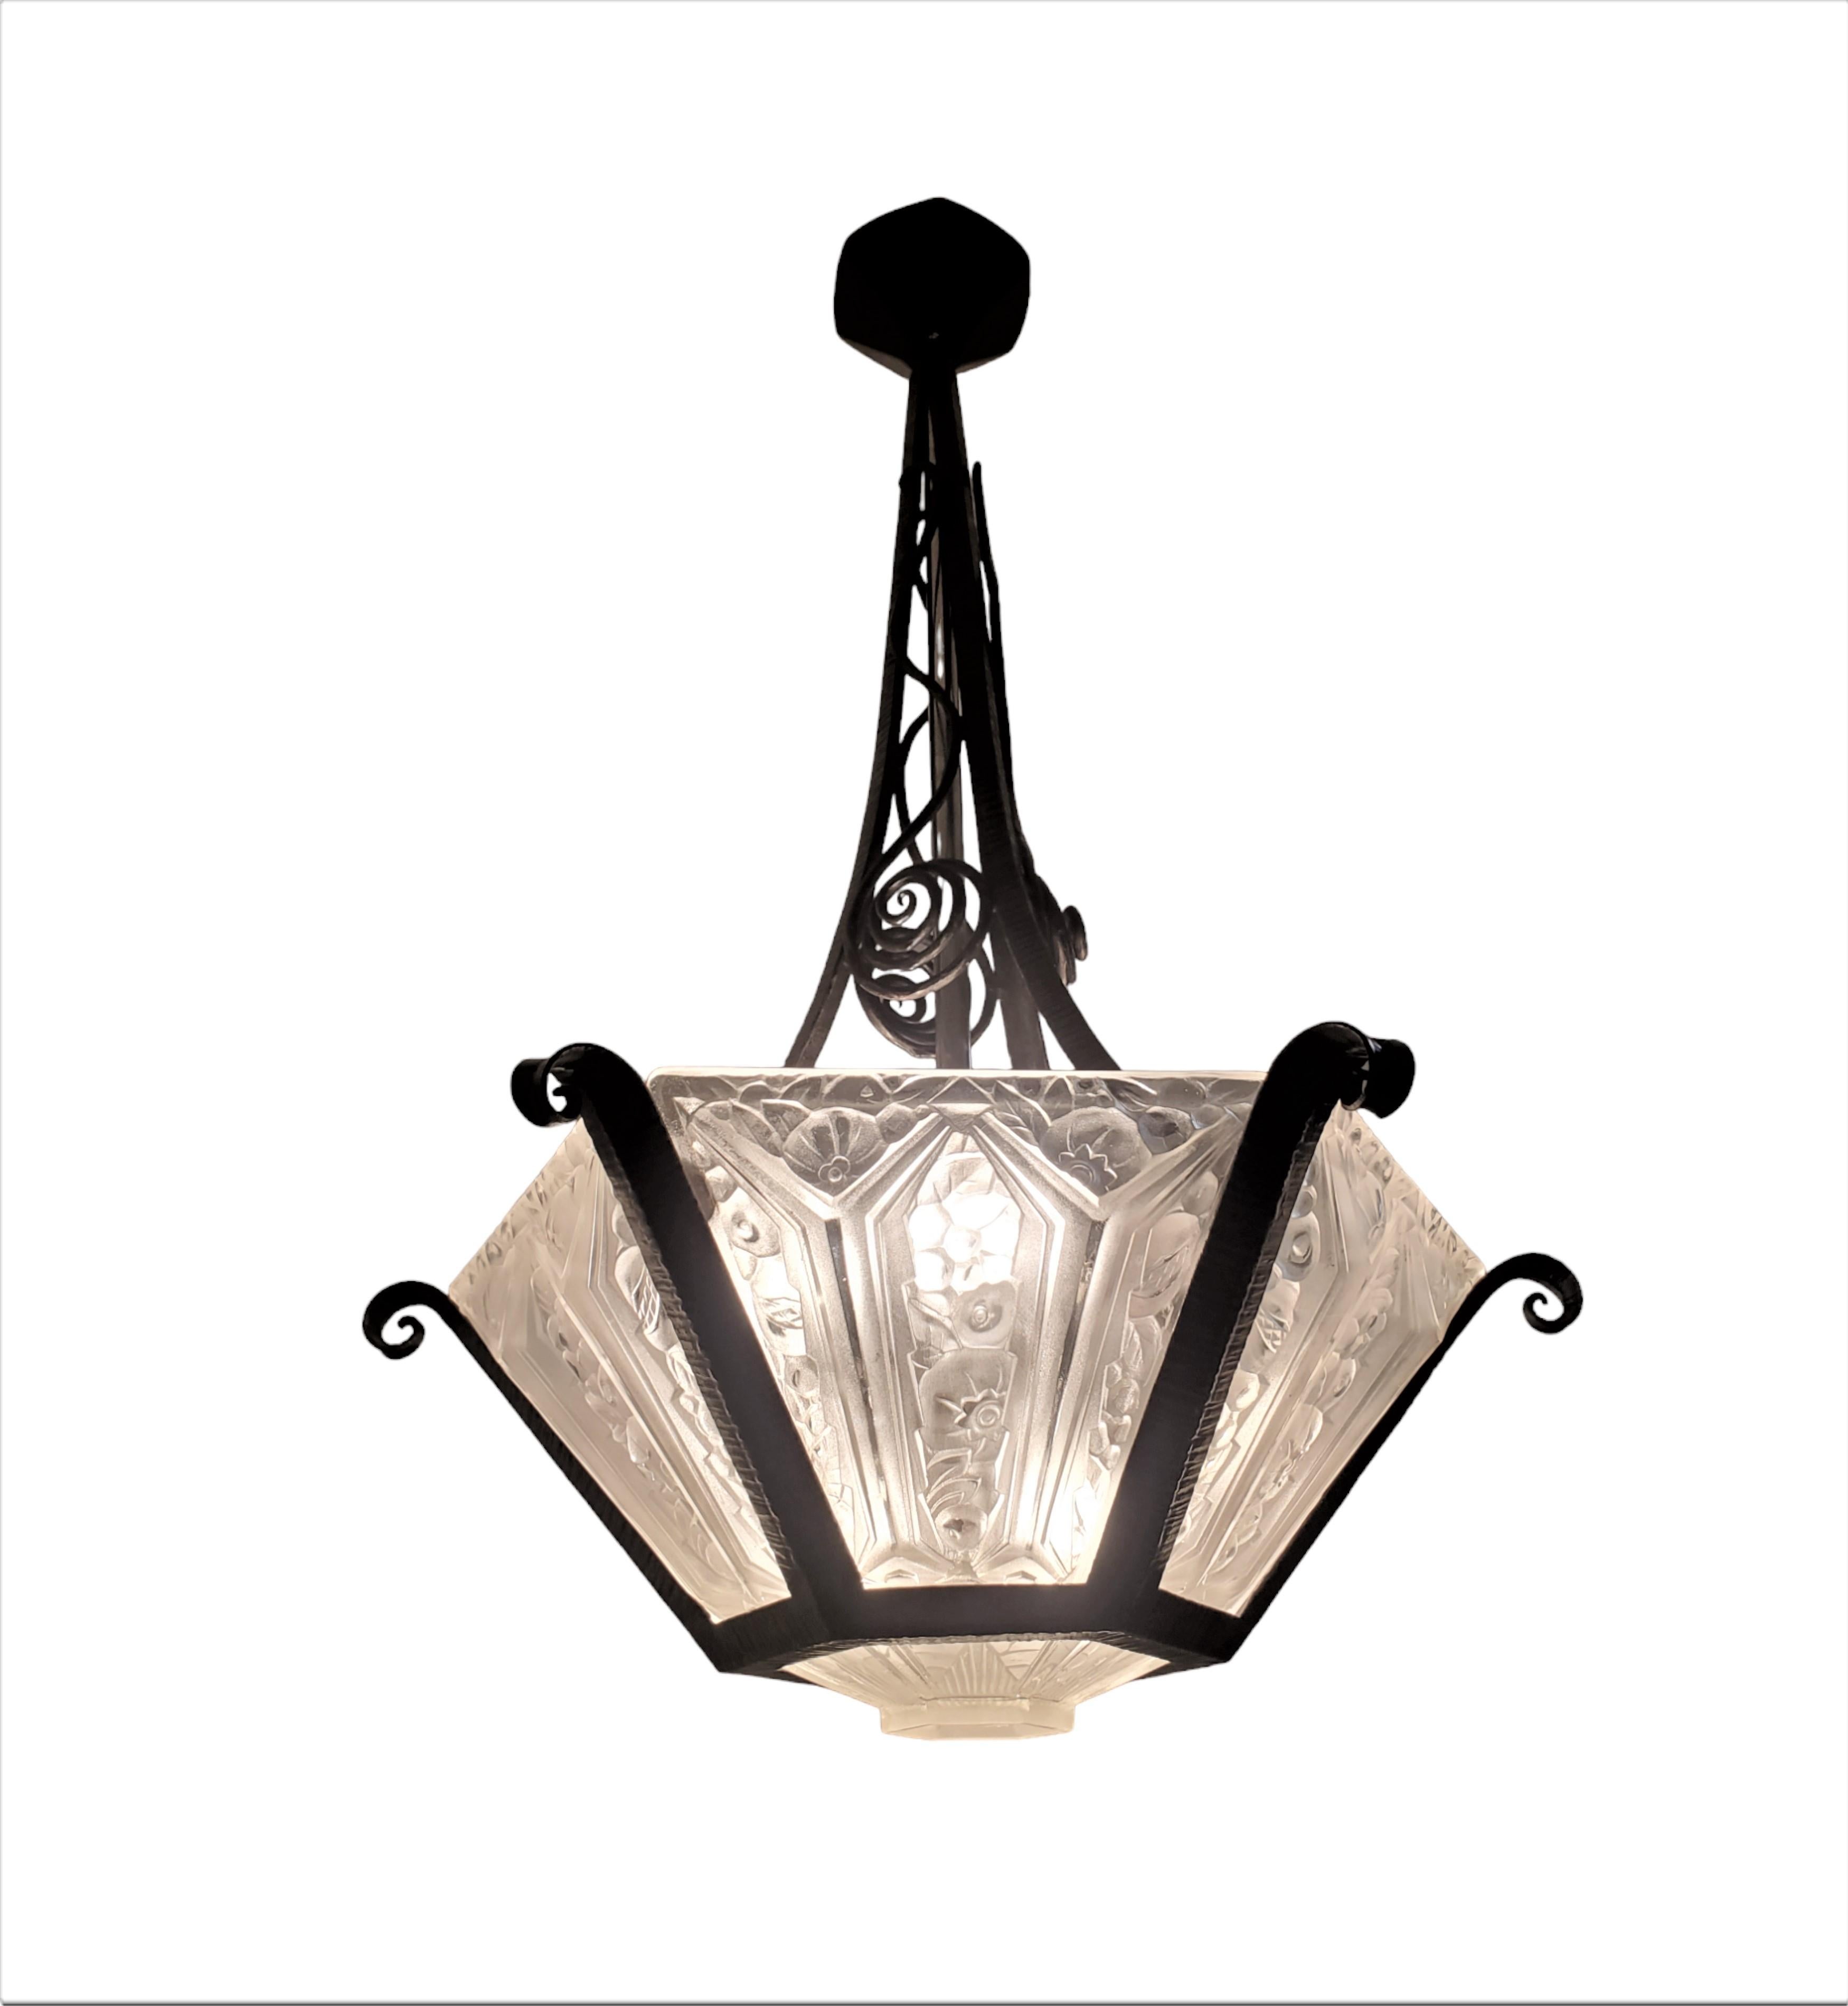 An exquisite French Art Deco chandelier by Verrerie Des Hanots characterized by its trapezoidal-shaped panels arranged in a captivating architectural form, is skillfully crafted within a hand-forged iron original armature. The six frosted art glass